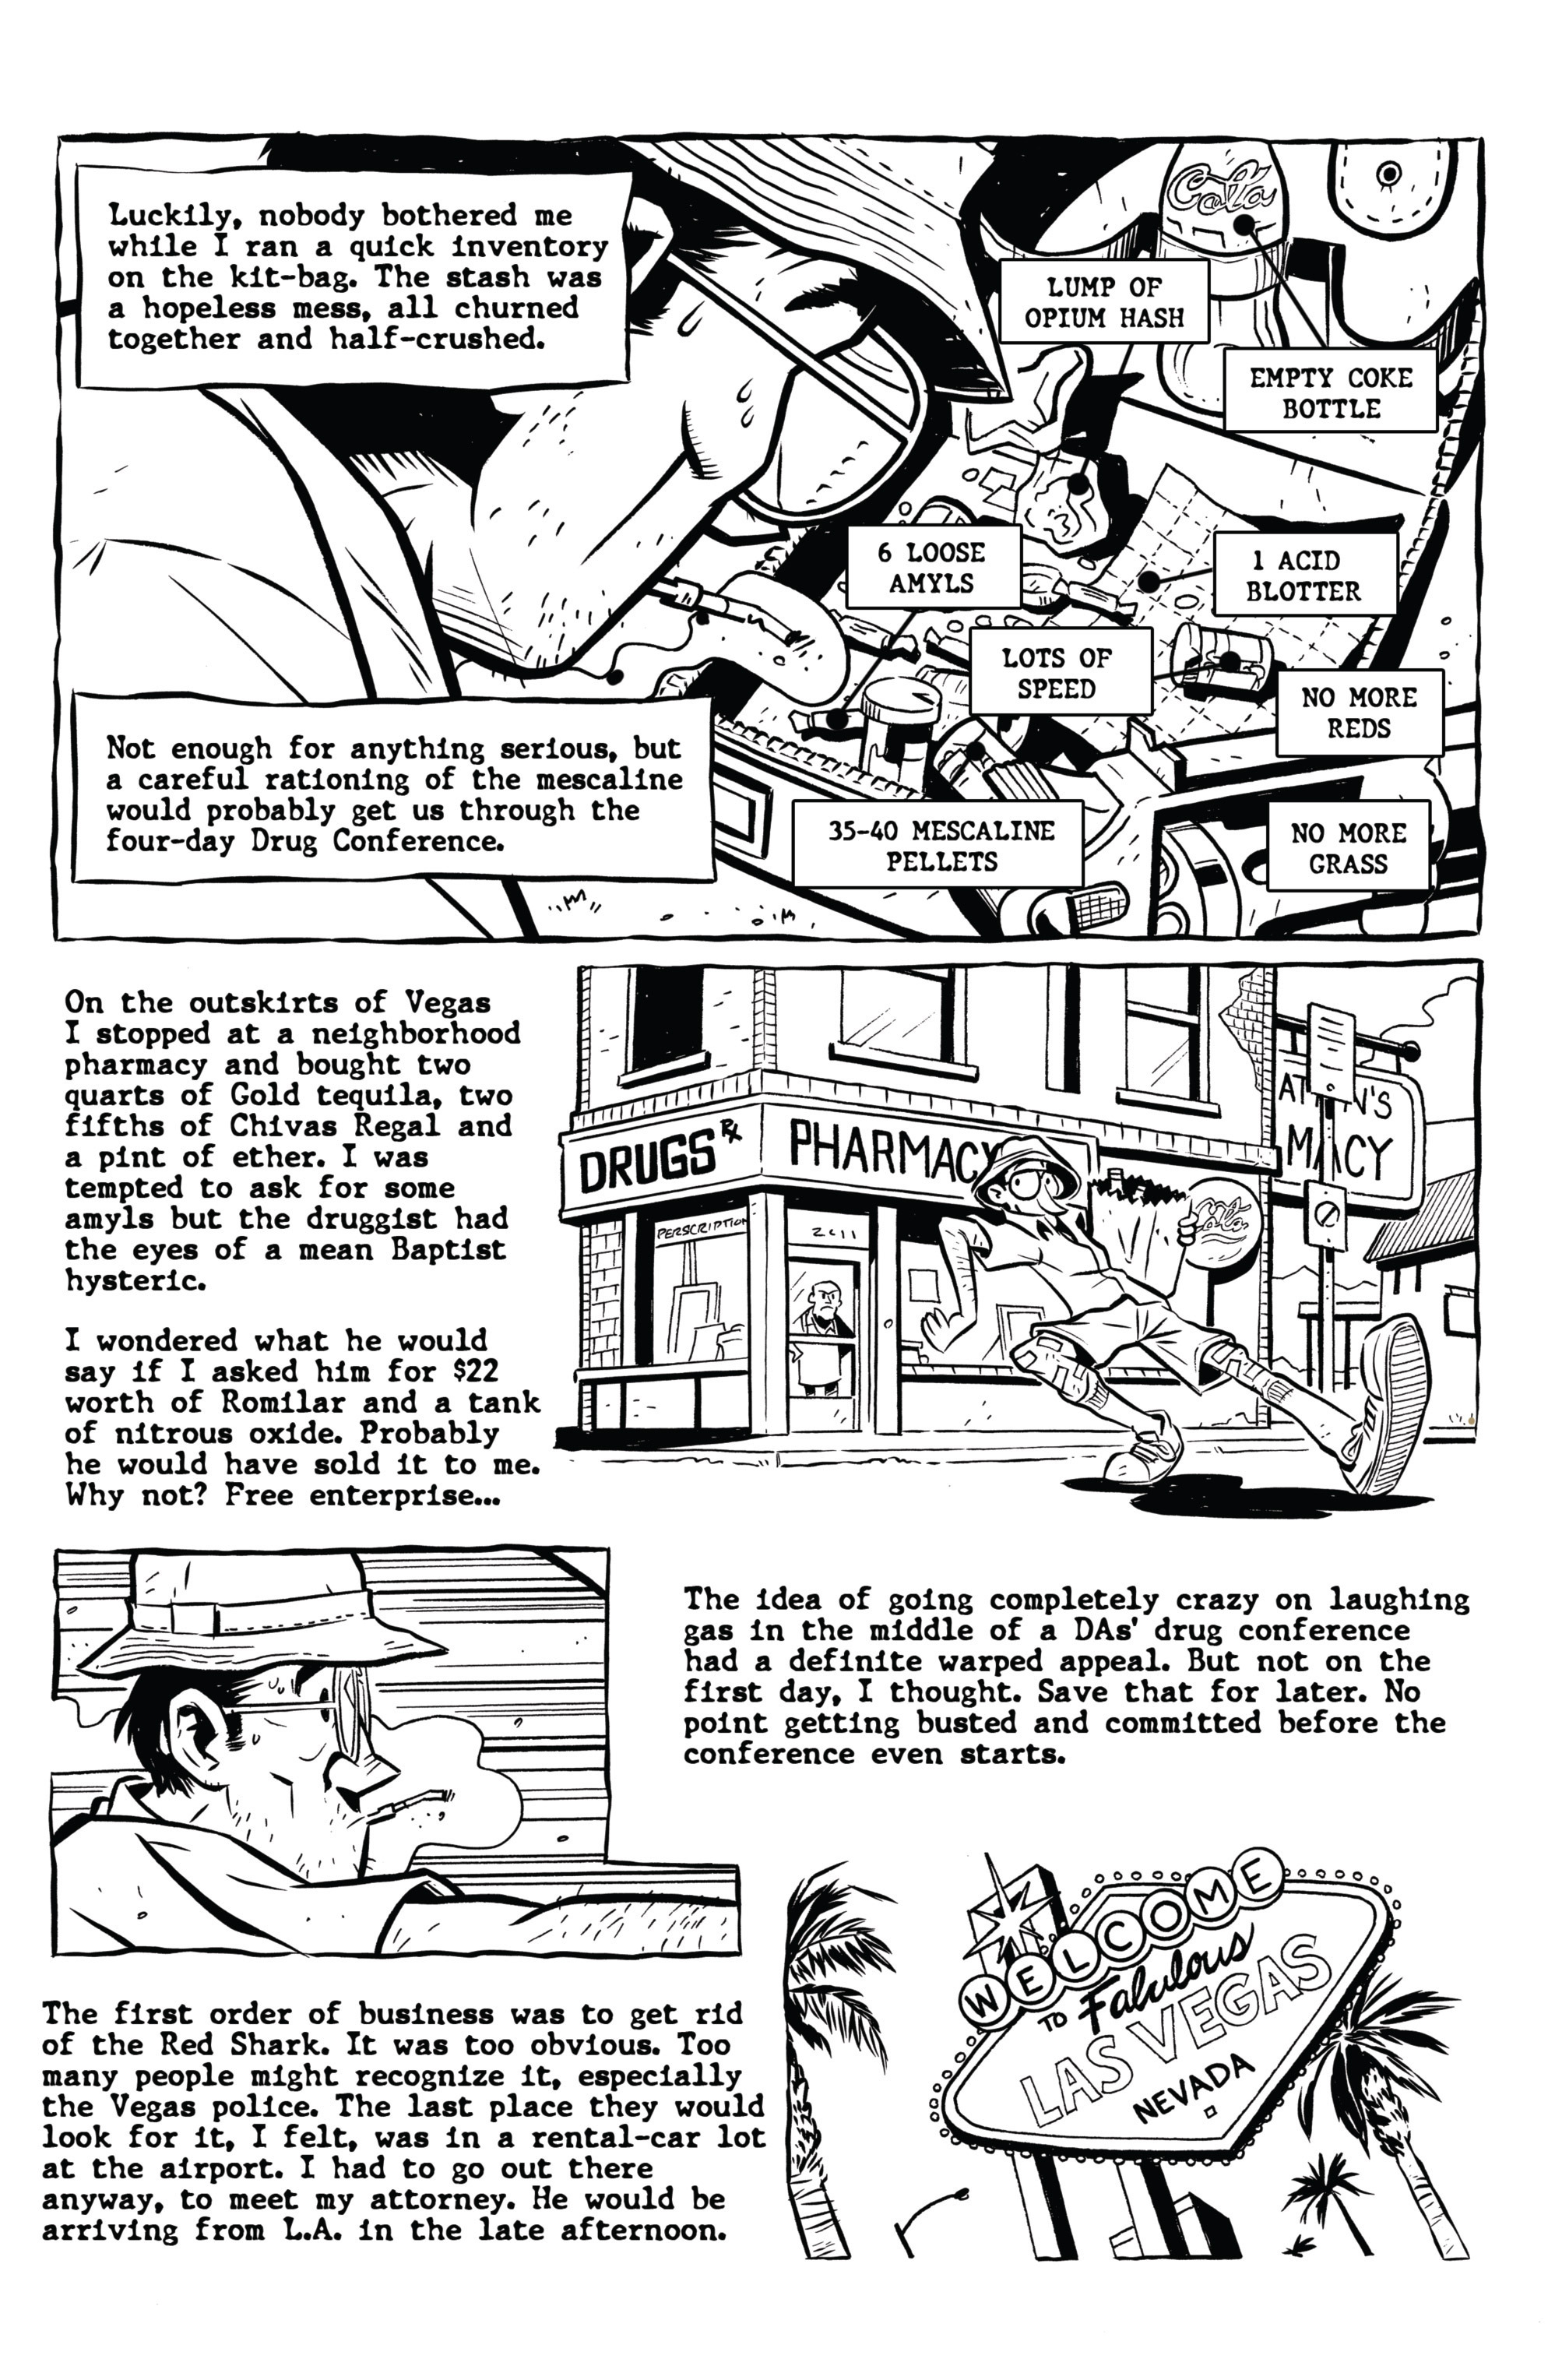 Read online Hunter S. Thompson's Fear and Loathing in Las Vegas comic -  Issue #3 - 15